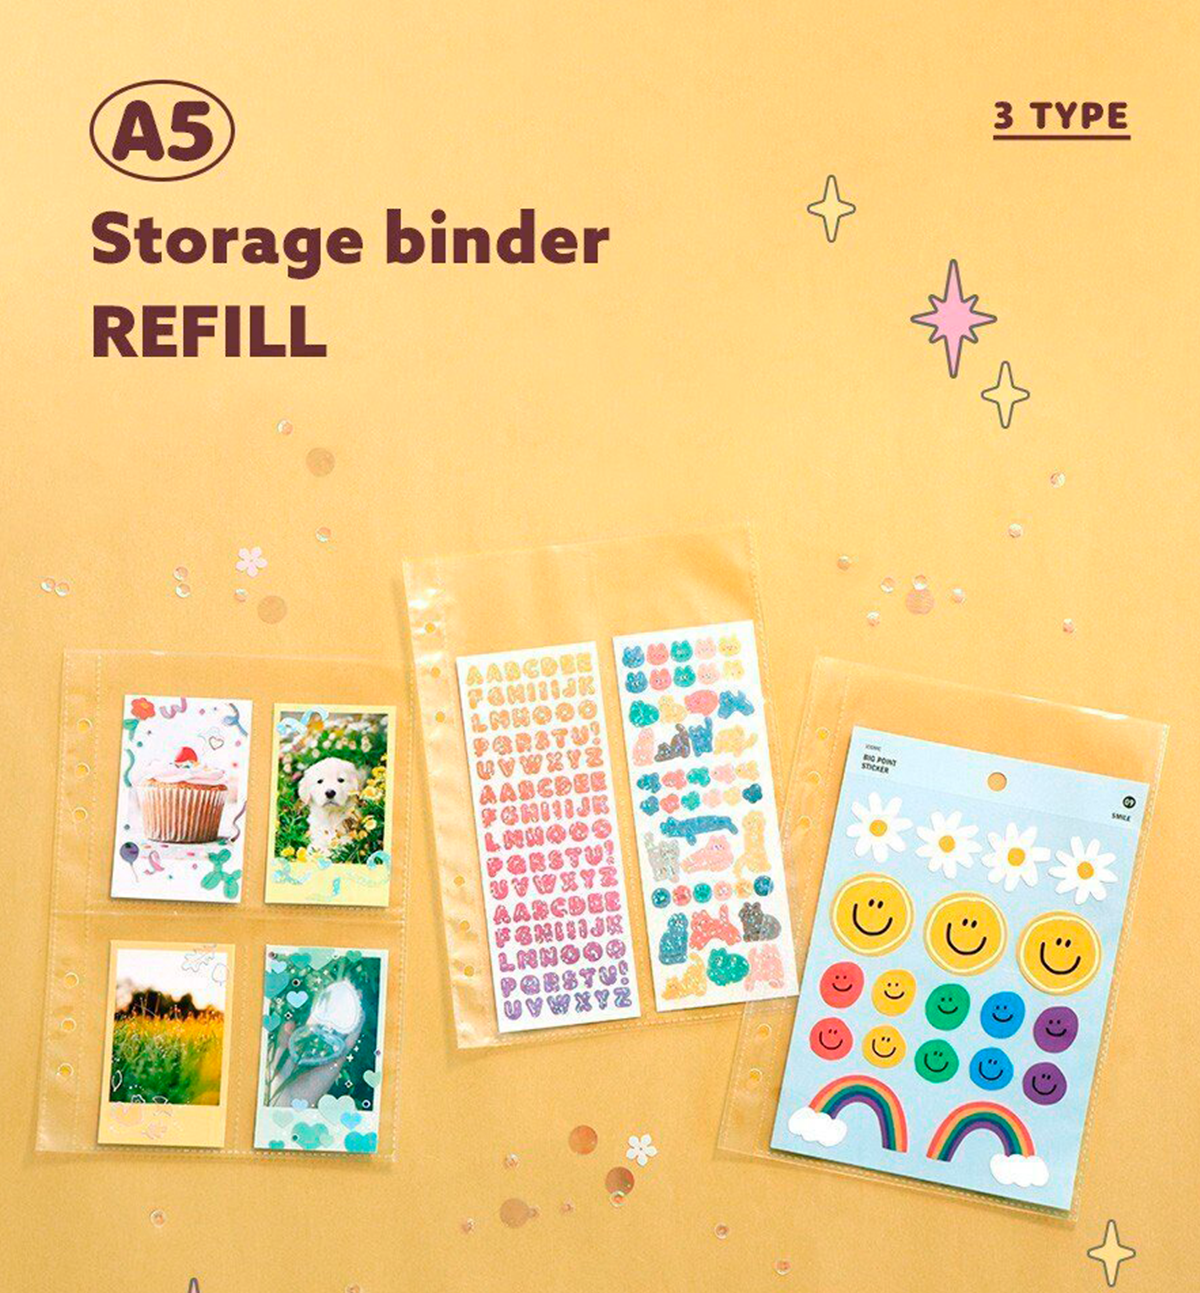 Iconic Colorful Lettering Sticky Album, DIY Scrapbook Photo Album, Refill  Self Adhesive Sheets, 25 Binders Insert Sheets